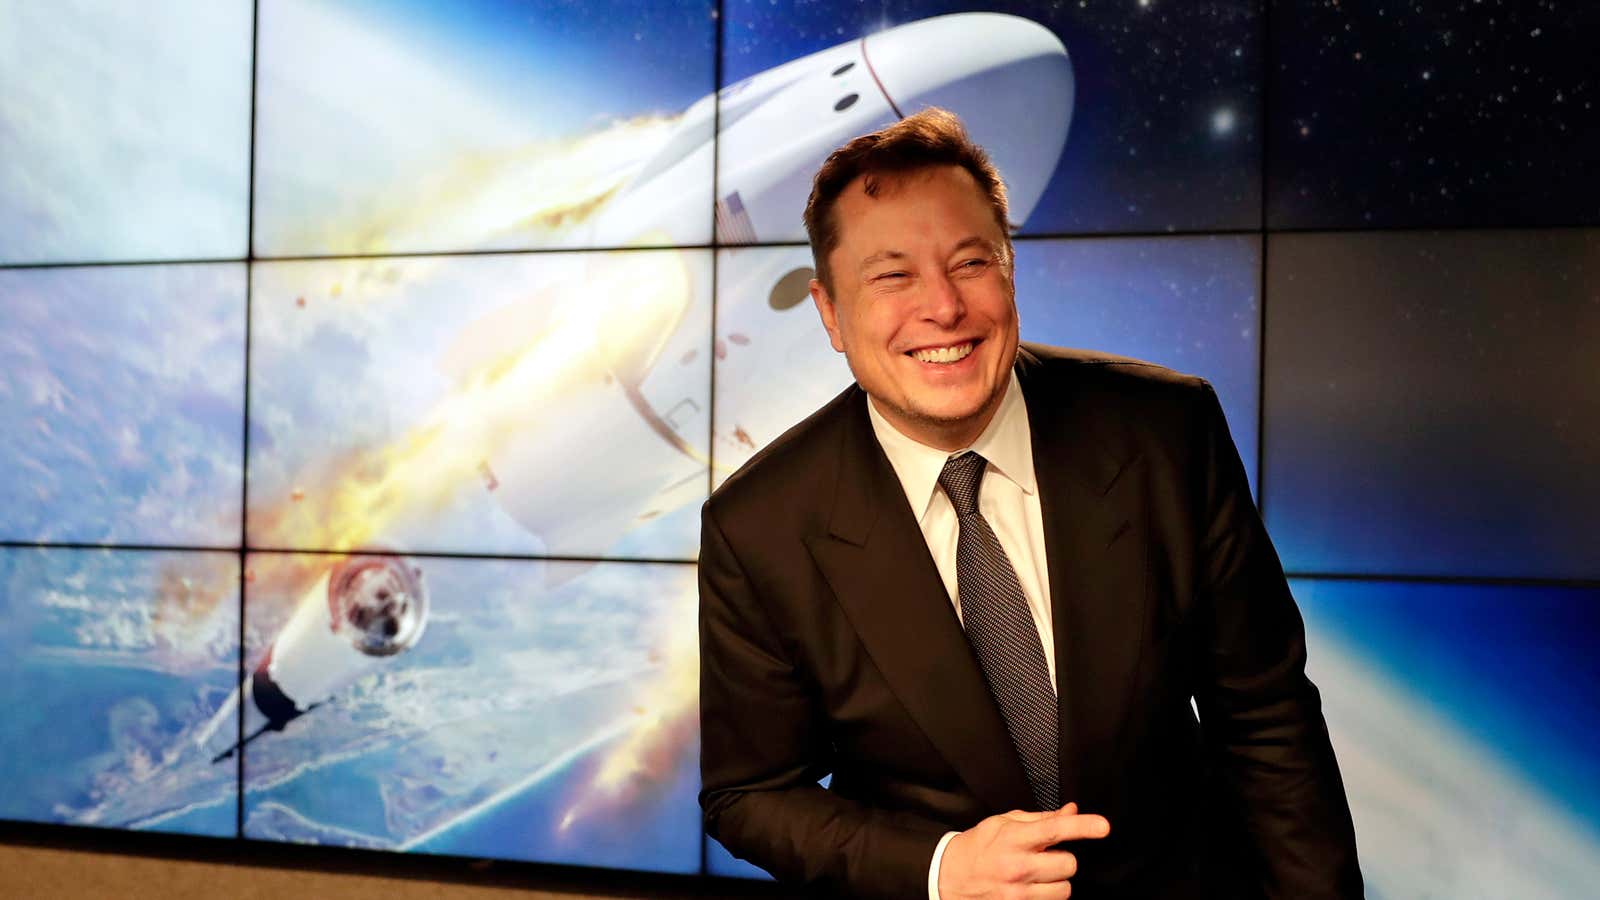 Elon Musk and the crew Dragon spacecraft.